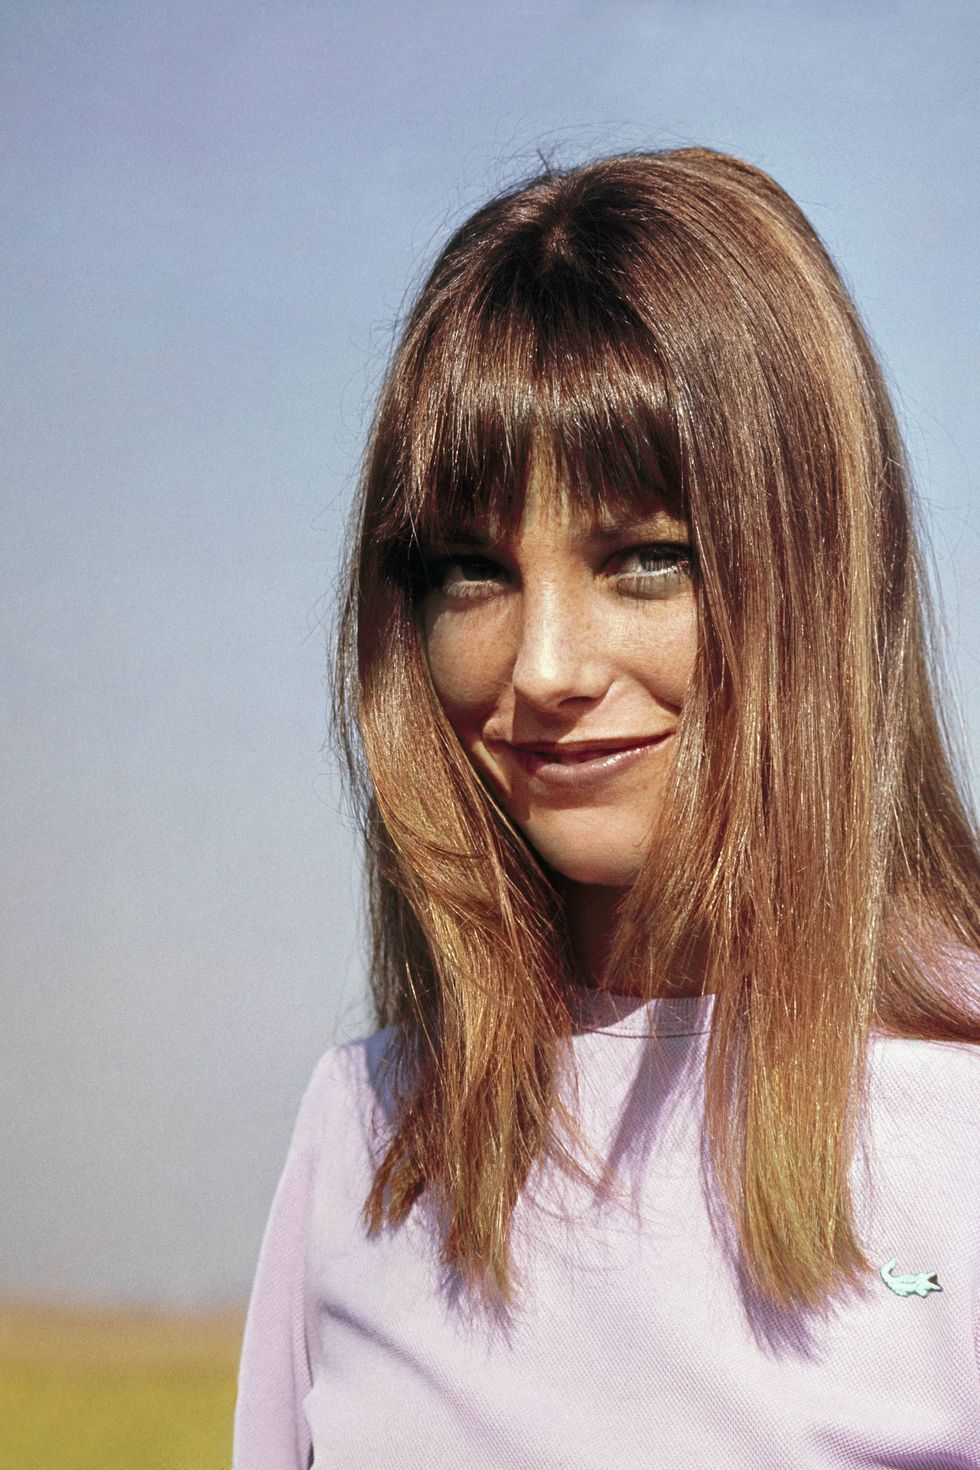 united states   circa 1970 portrait of english actress, jane birkin wearing a violet knit lacoste chemise, by david crystal photo by john cowanconde nast via getty images